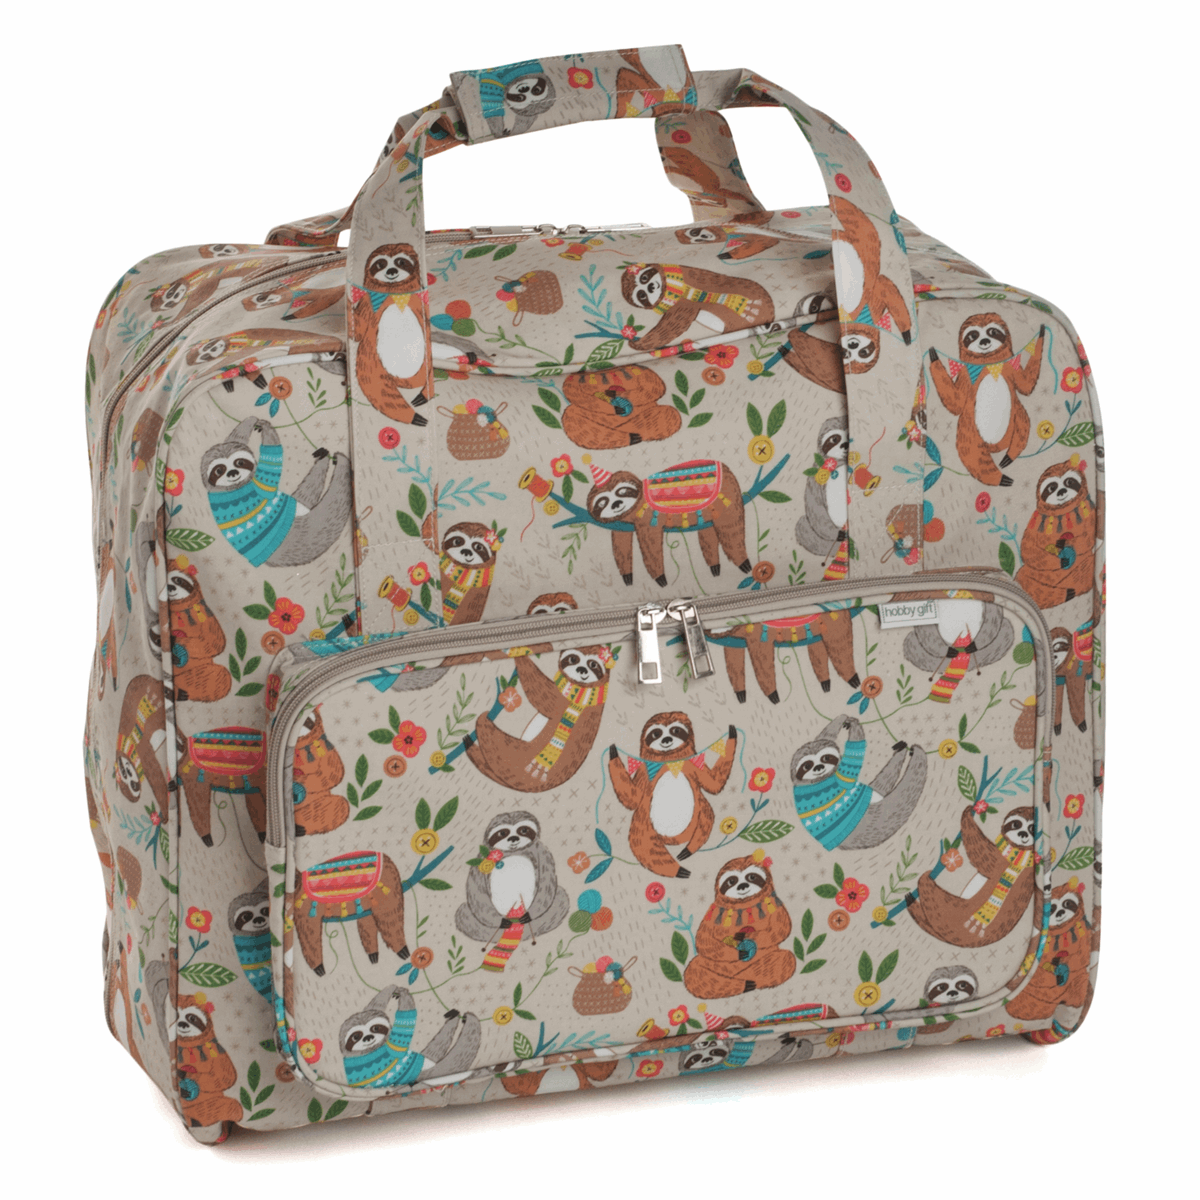 Hobby Gift PVC Sewing Machine Bags at Freckles and Co Sewing Sloth print